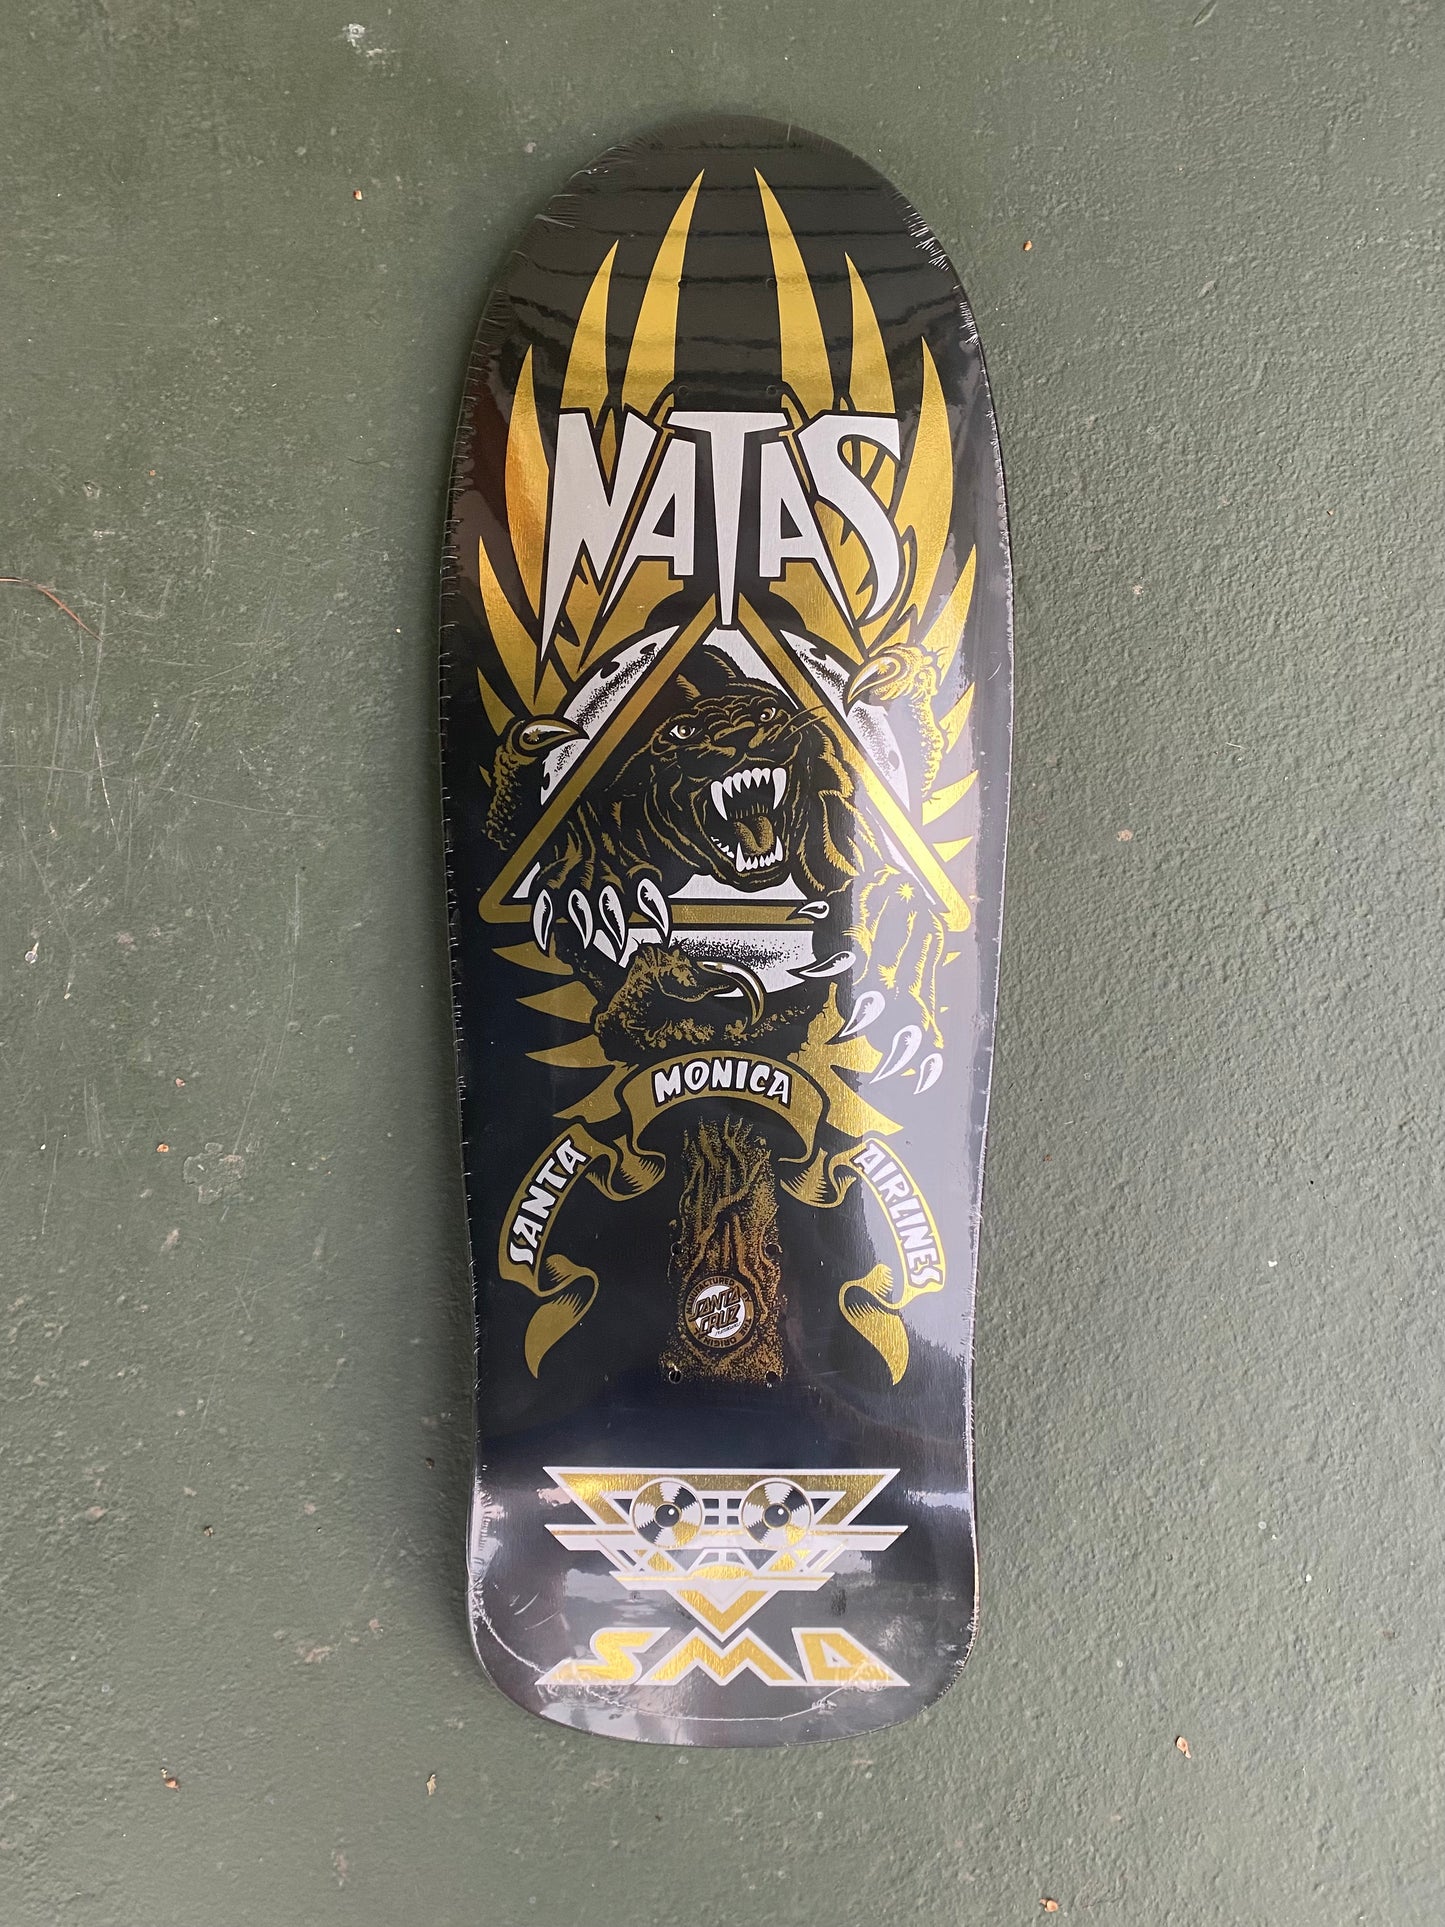 SMA Natas blind bag reissue skateboard deck by Santa Cruz with gold foil panther 3 graphics 10.538in X 30.14in